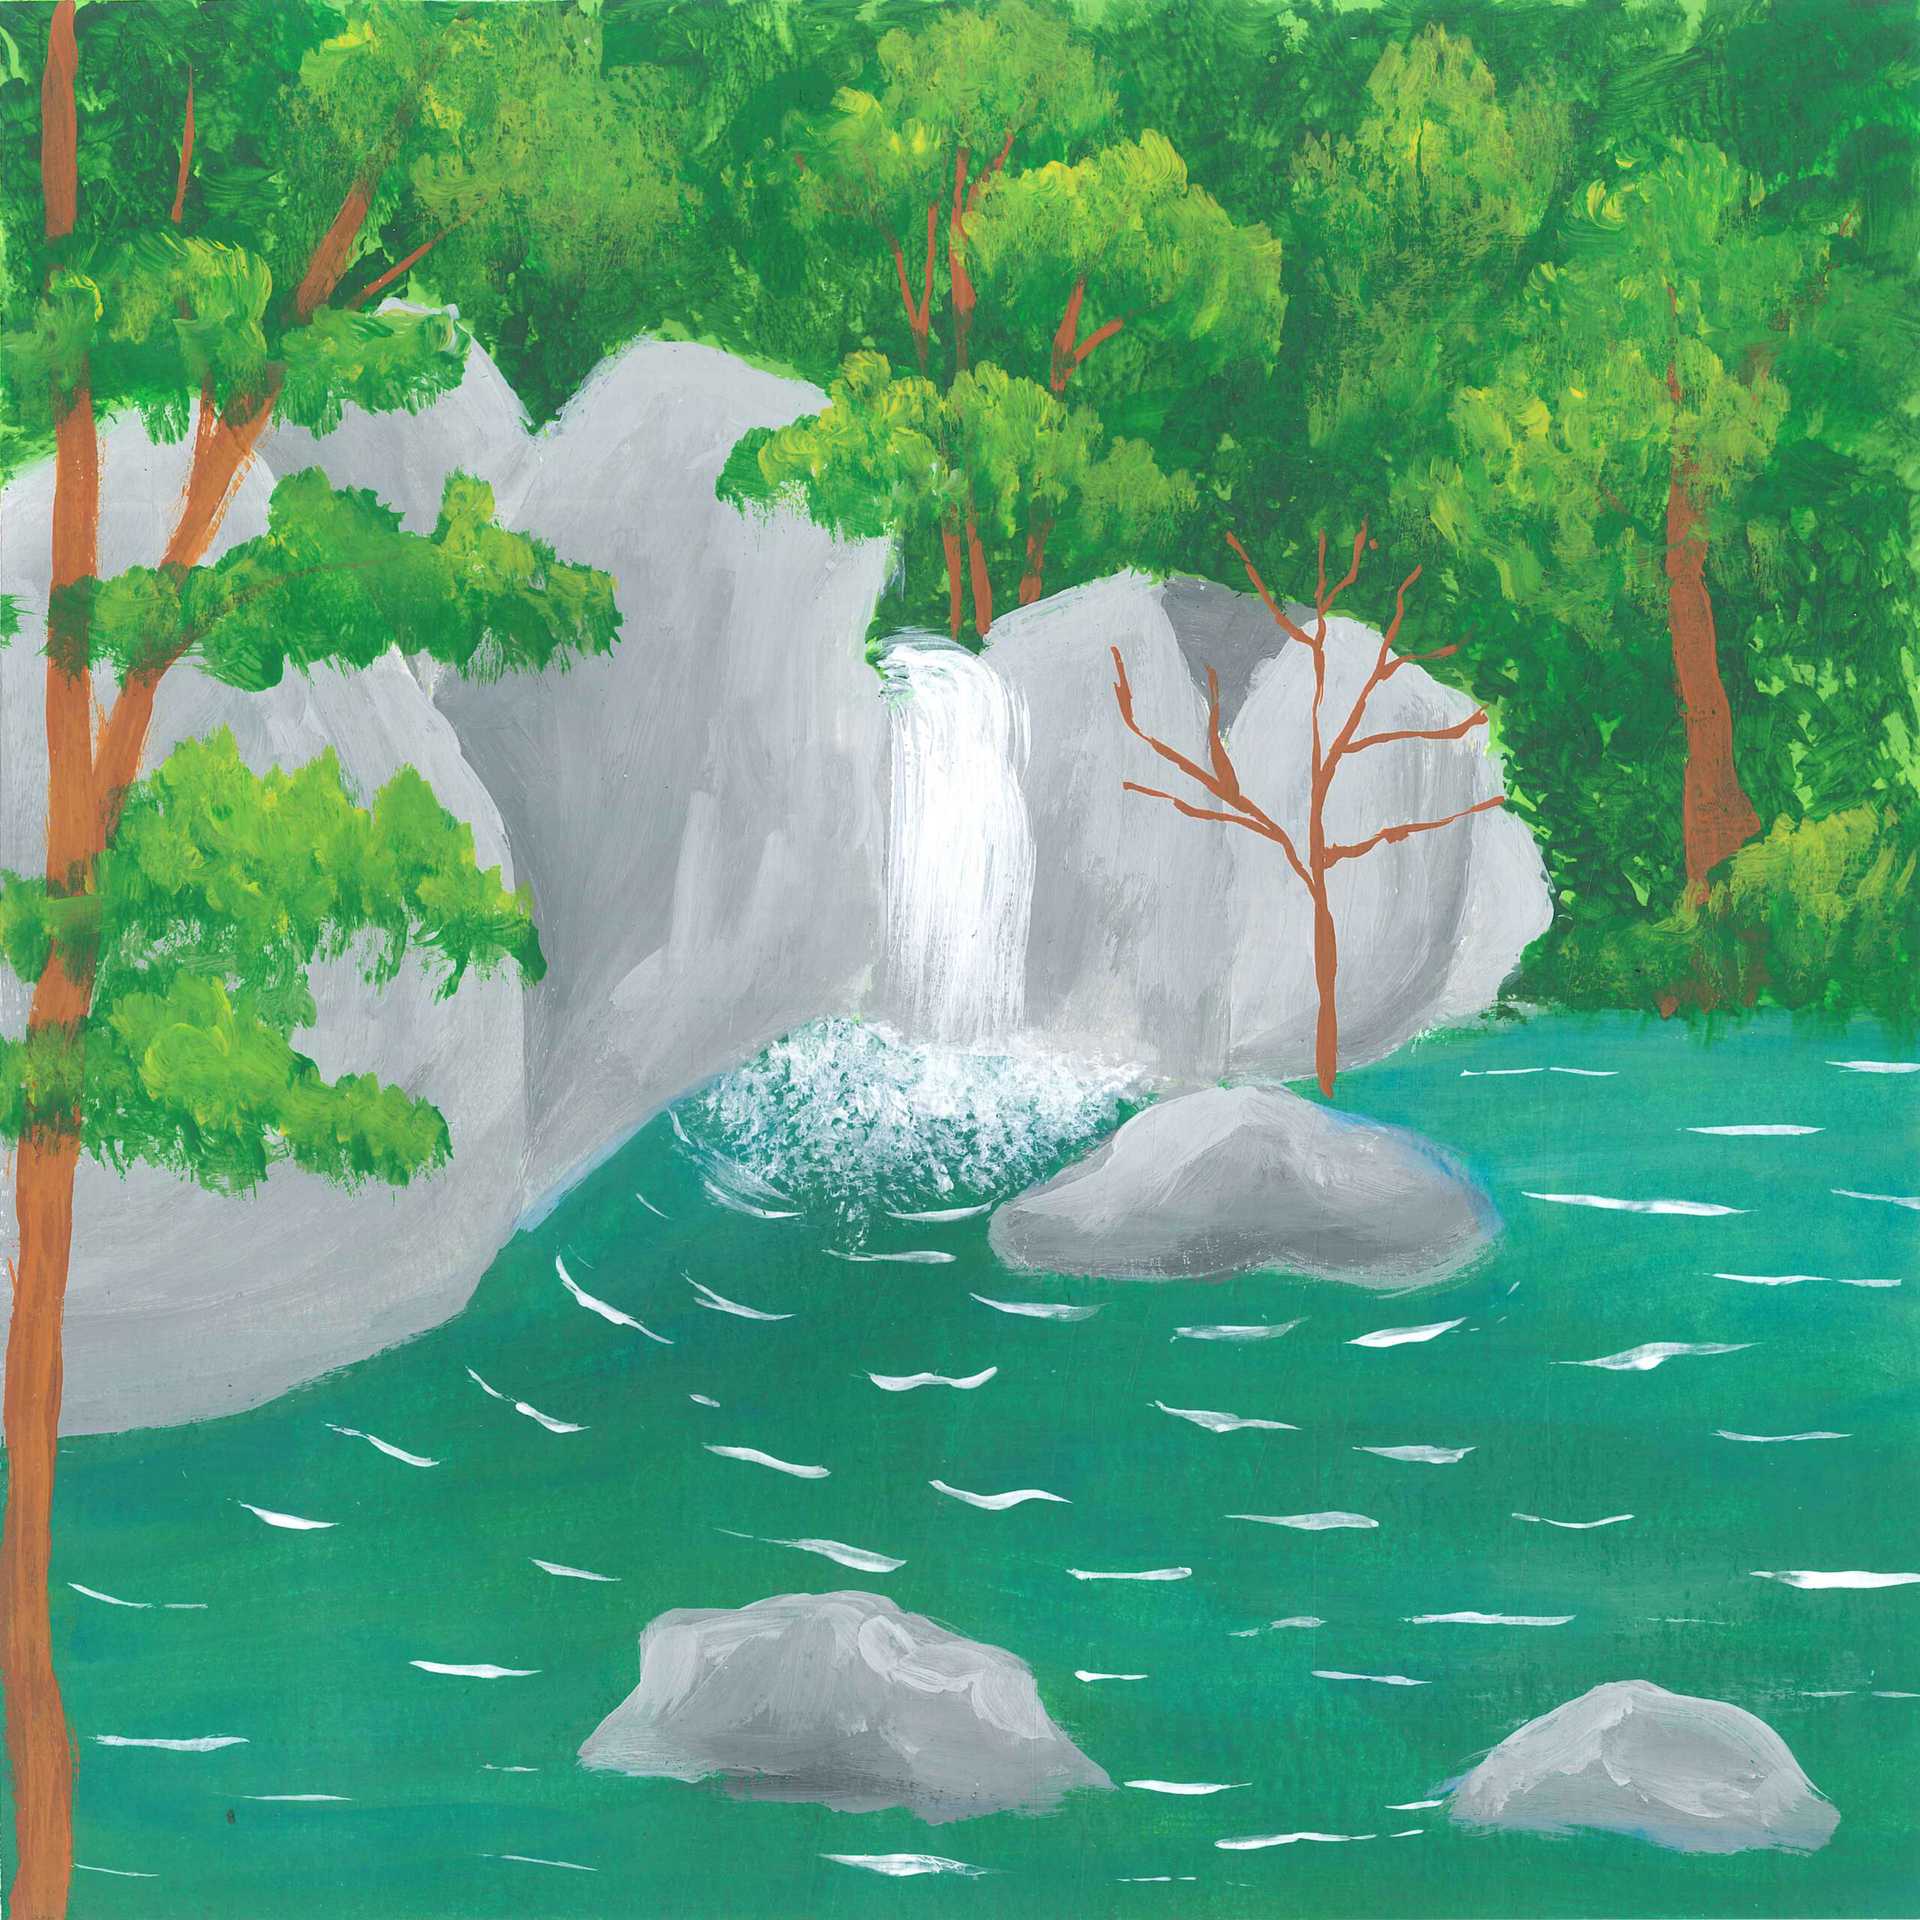 Water Flowing in Creek - nature landscape painting - earth.fm